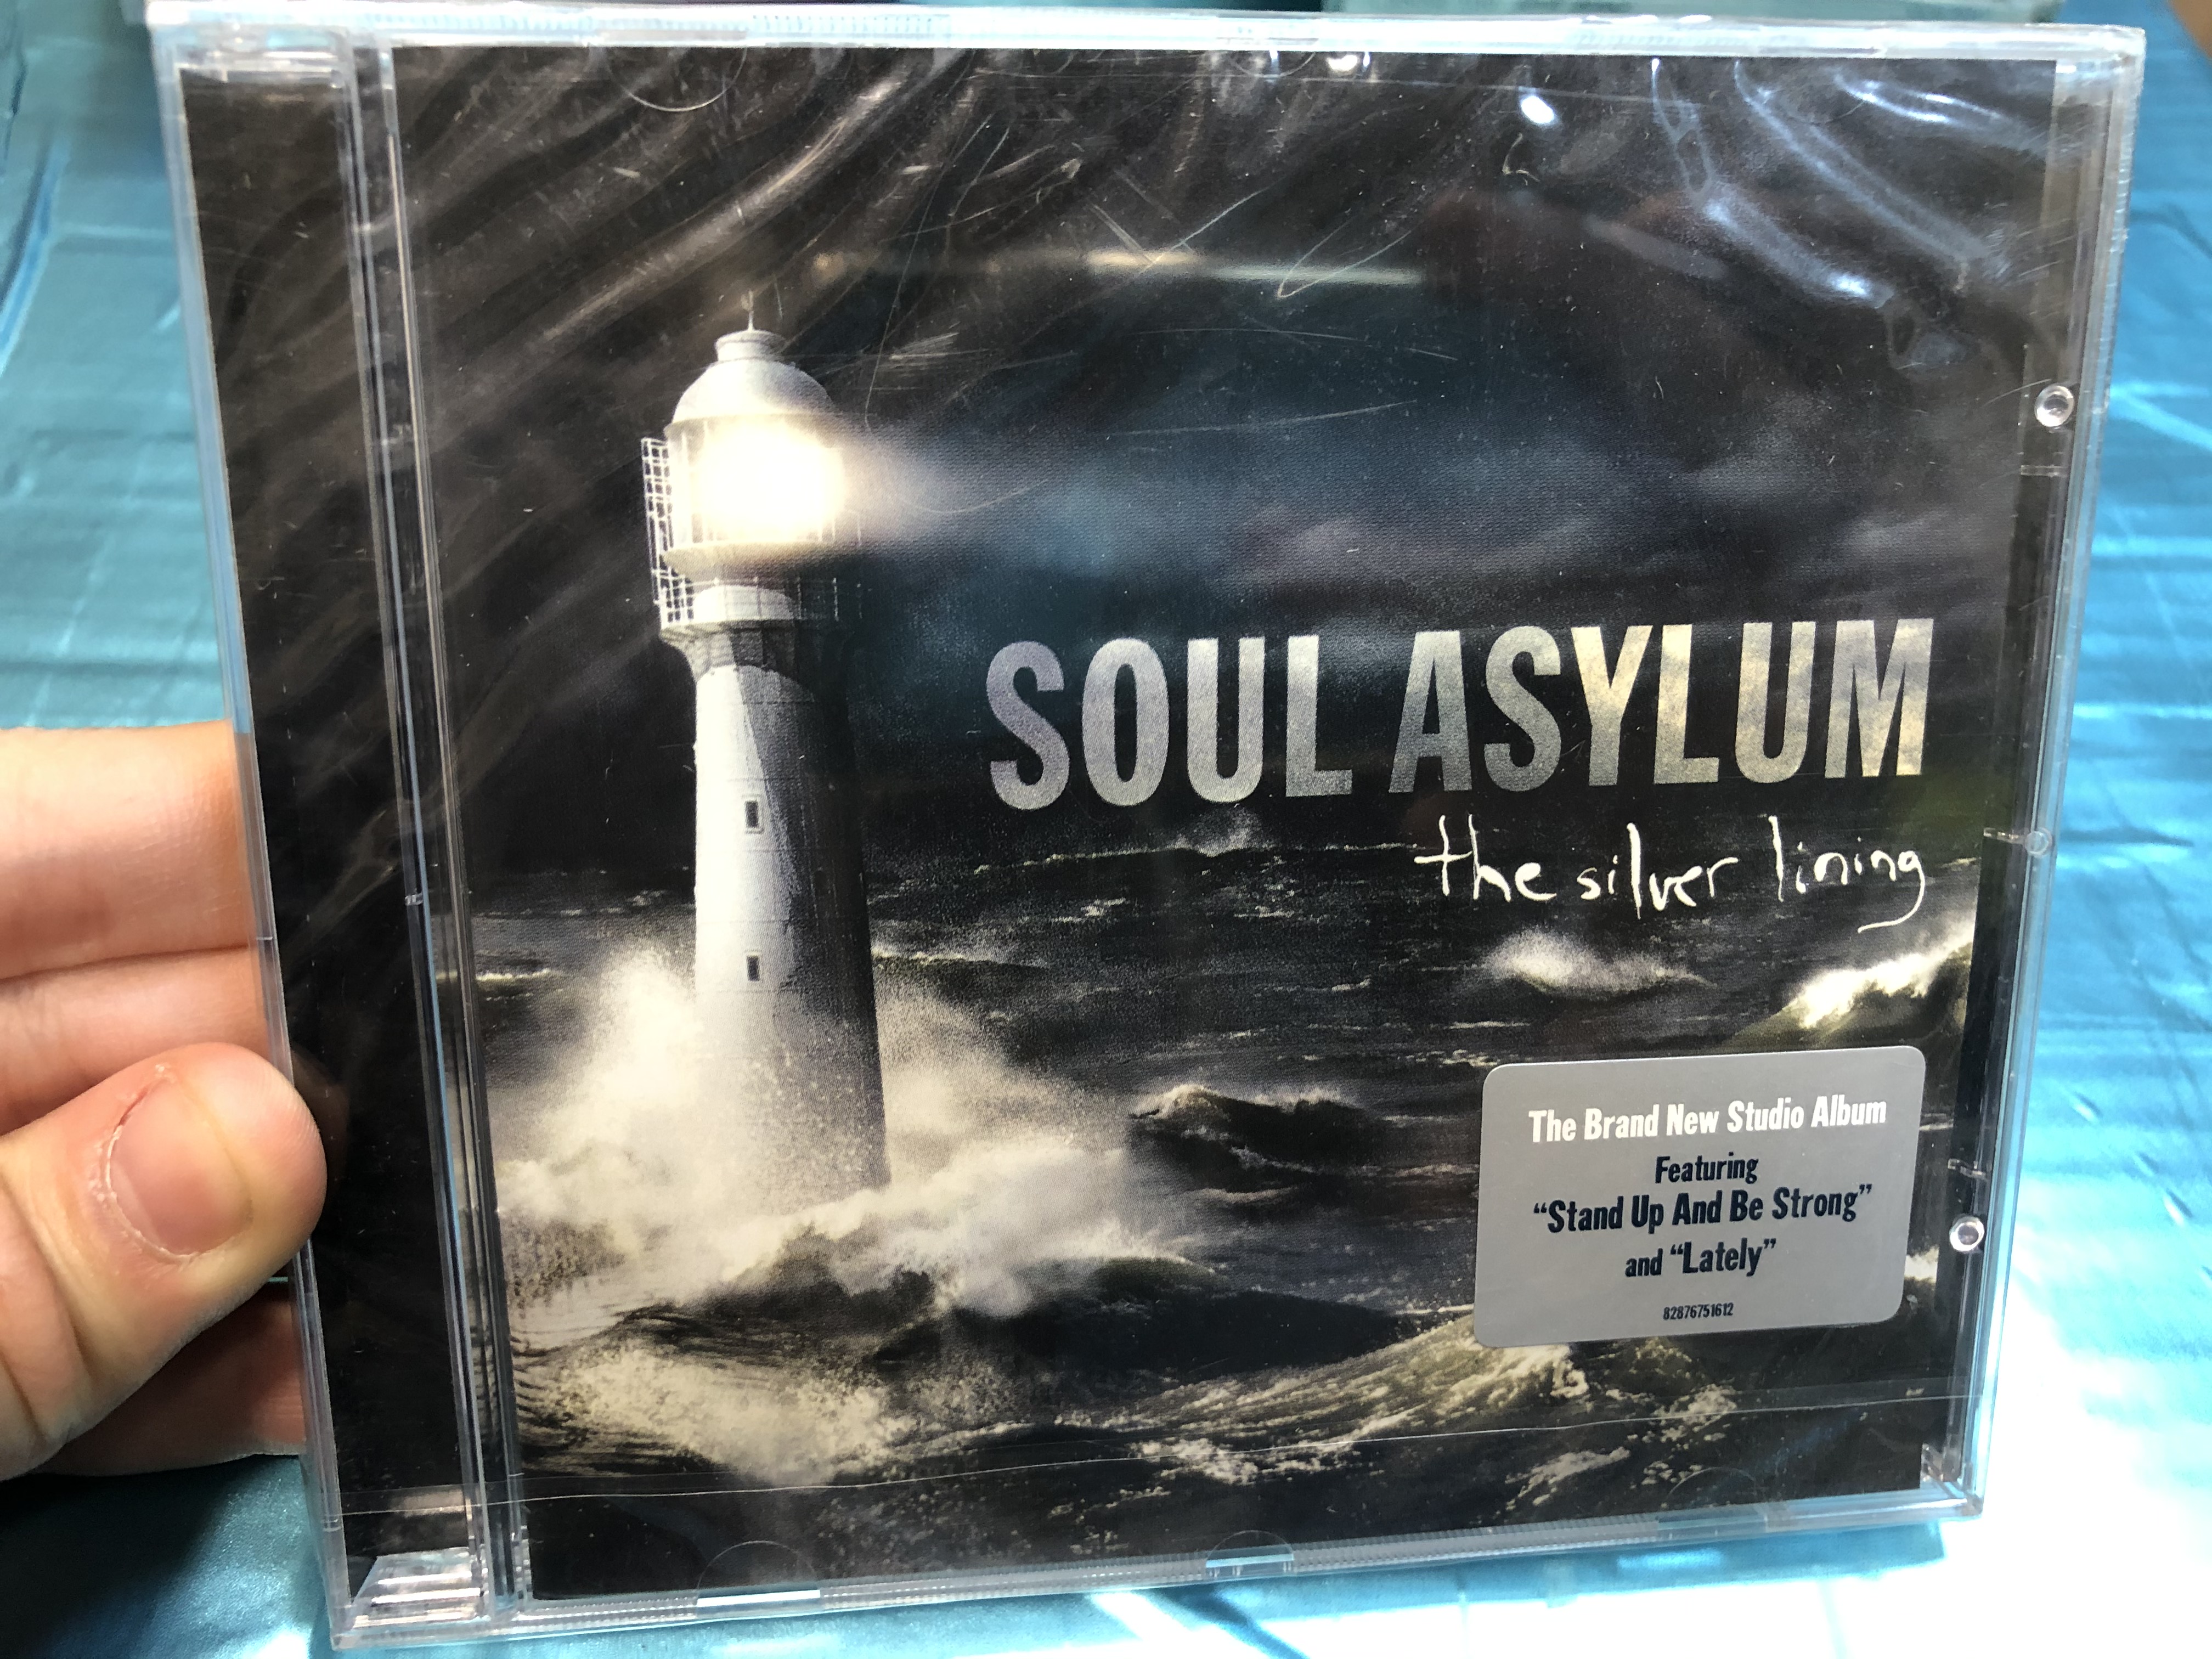 soul-asylum-the-silver-lining-the-brand-new-studio-album-featuring-stand-up-and-be-strong-and-lately-legacy-audio-cd-2006-82876751612-1-.jpg